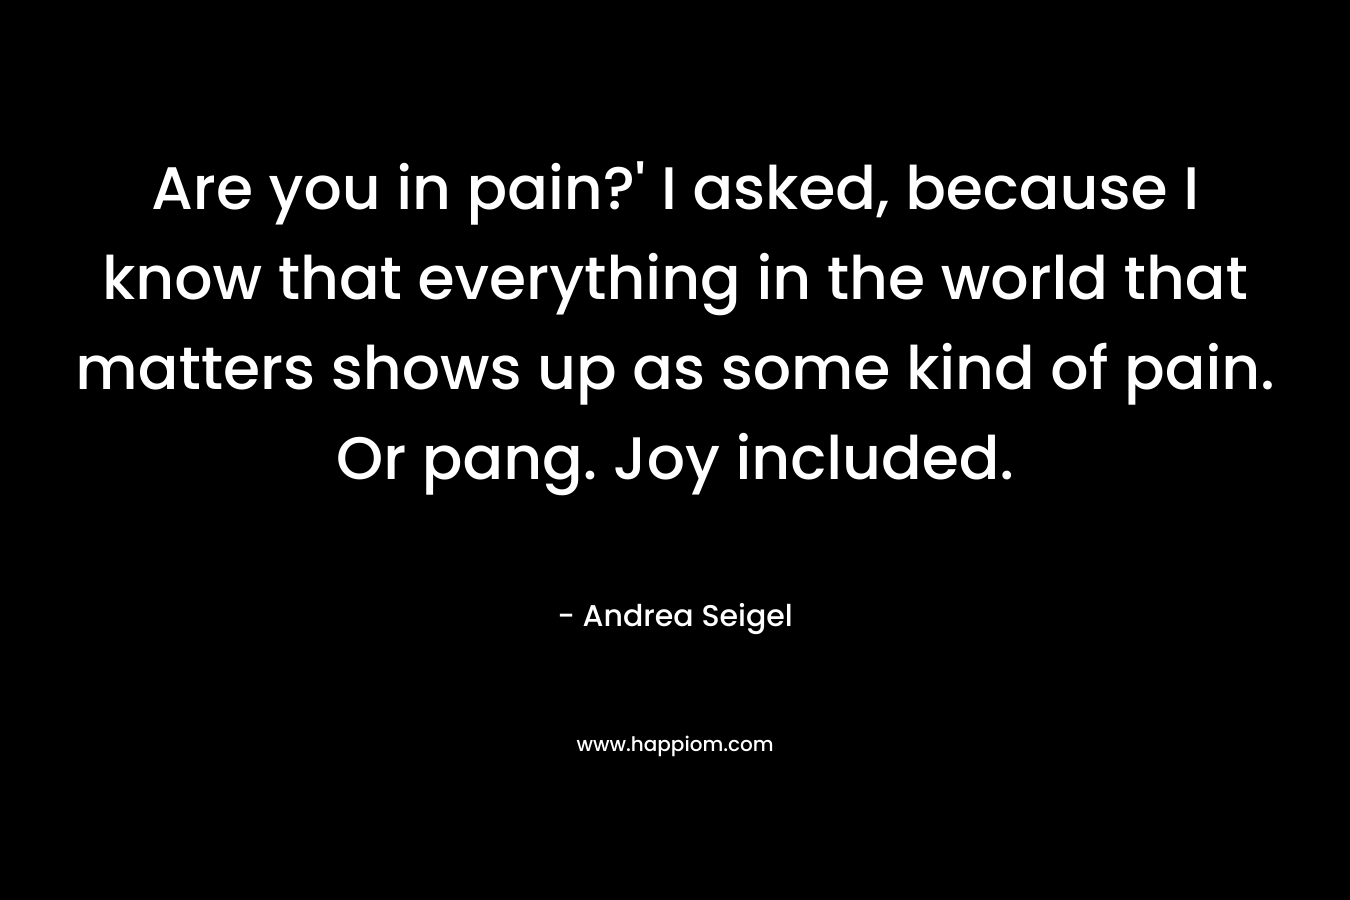 Are you in pain?' I asked, because I know that everything in the world that matters shows up as some kind of pain. Or pang. Joy included.